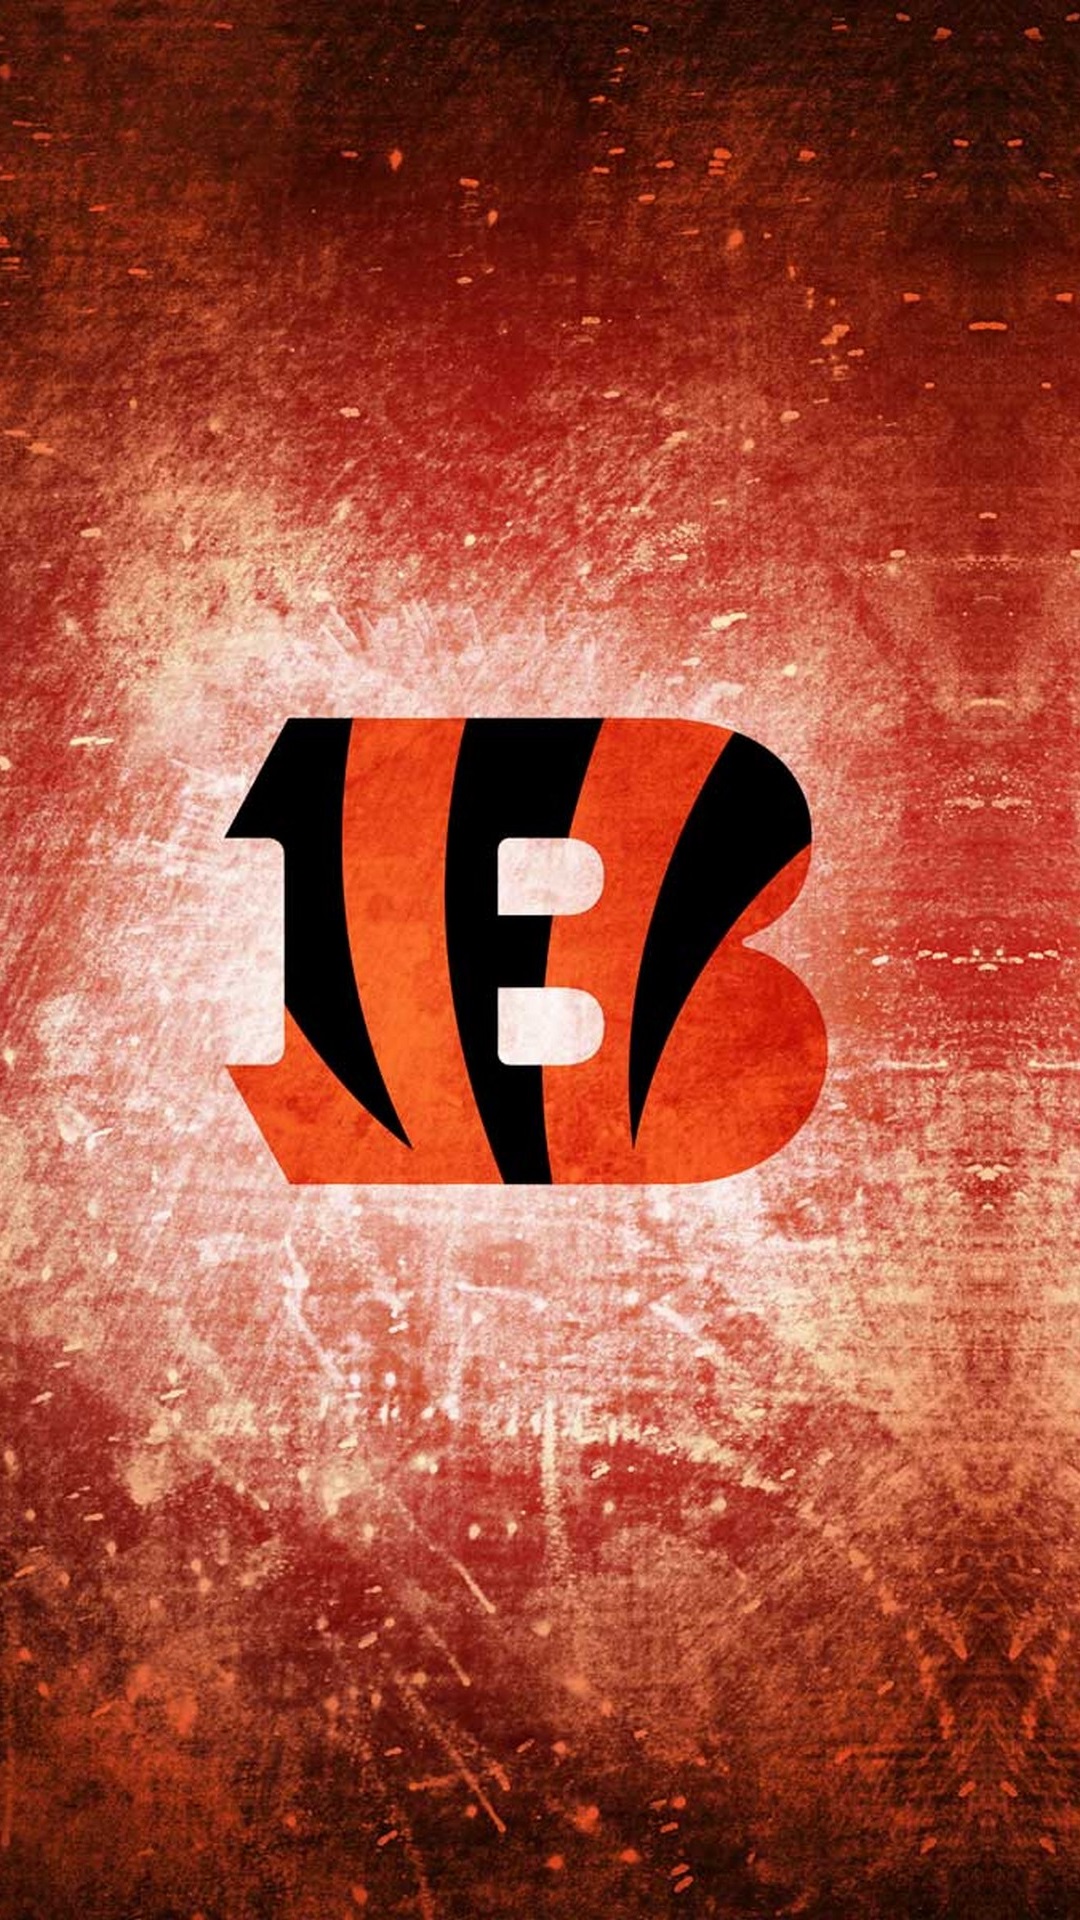 Cincinnati Bengals iPhone Wallpaper High Quality With high-resolution 1080X1920 pixel. Donwload and set as wallpaper for your iPhone X, iPhone XS home screen backgrounds, XS Max, XR, iPhone8 lock screen wallpaper, iPhone 7, 6, SE, and other mobile devices